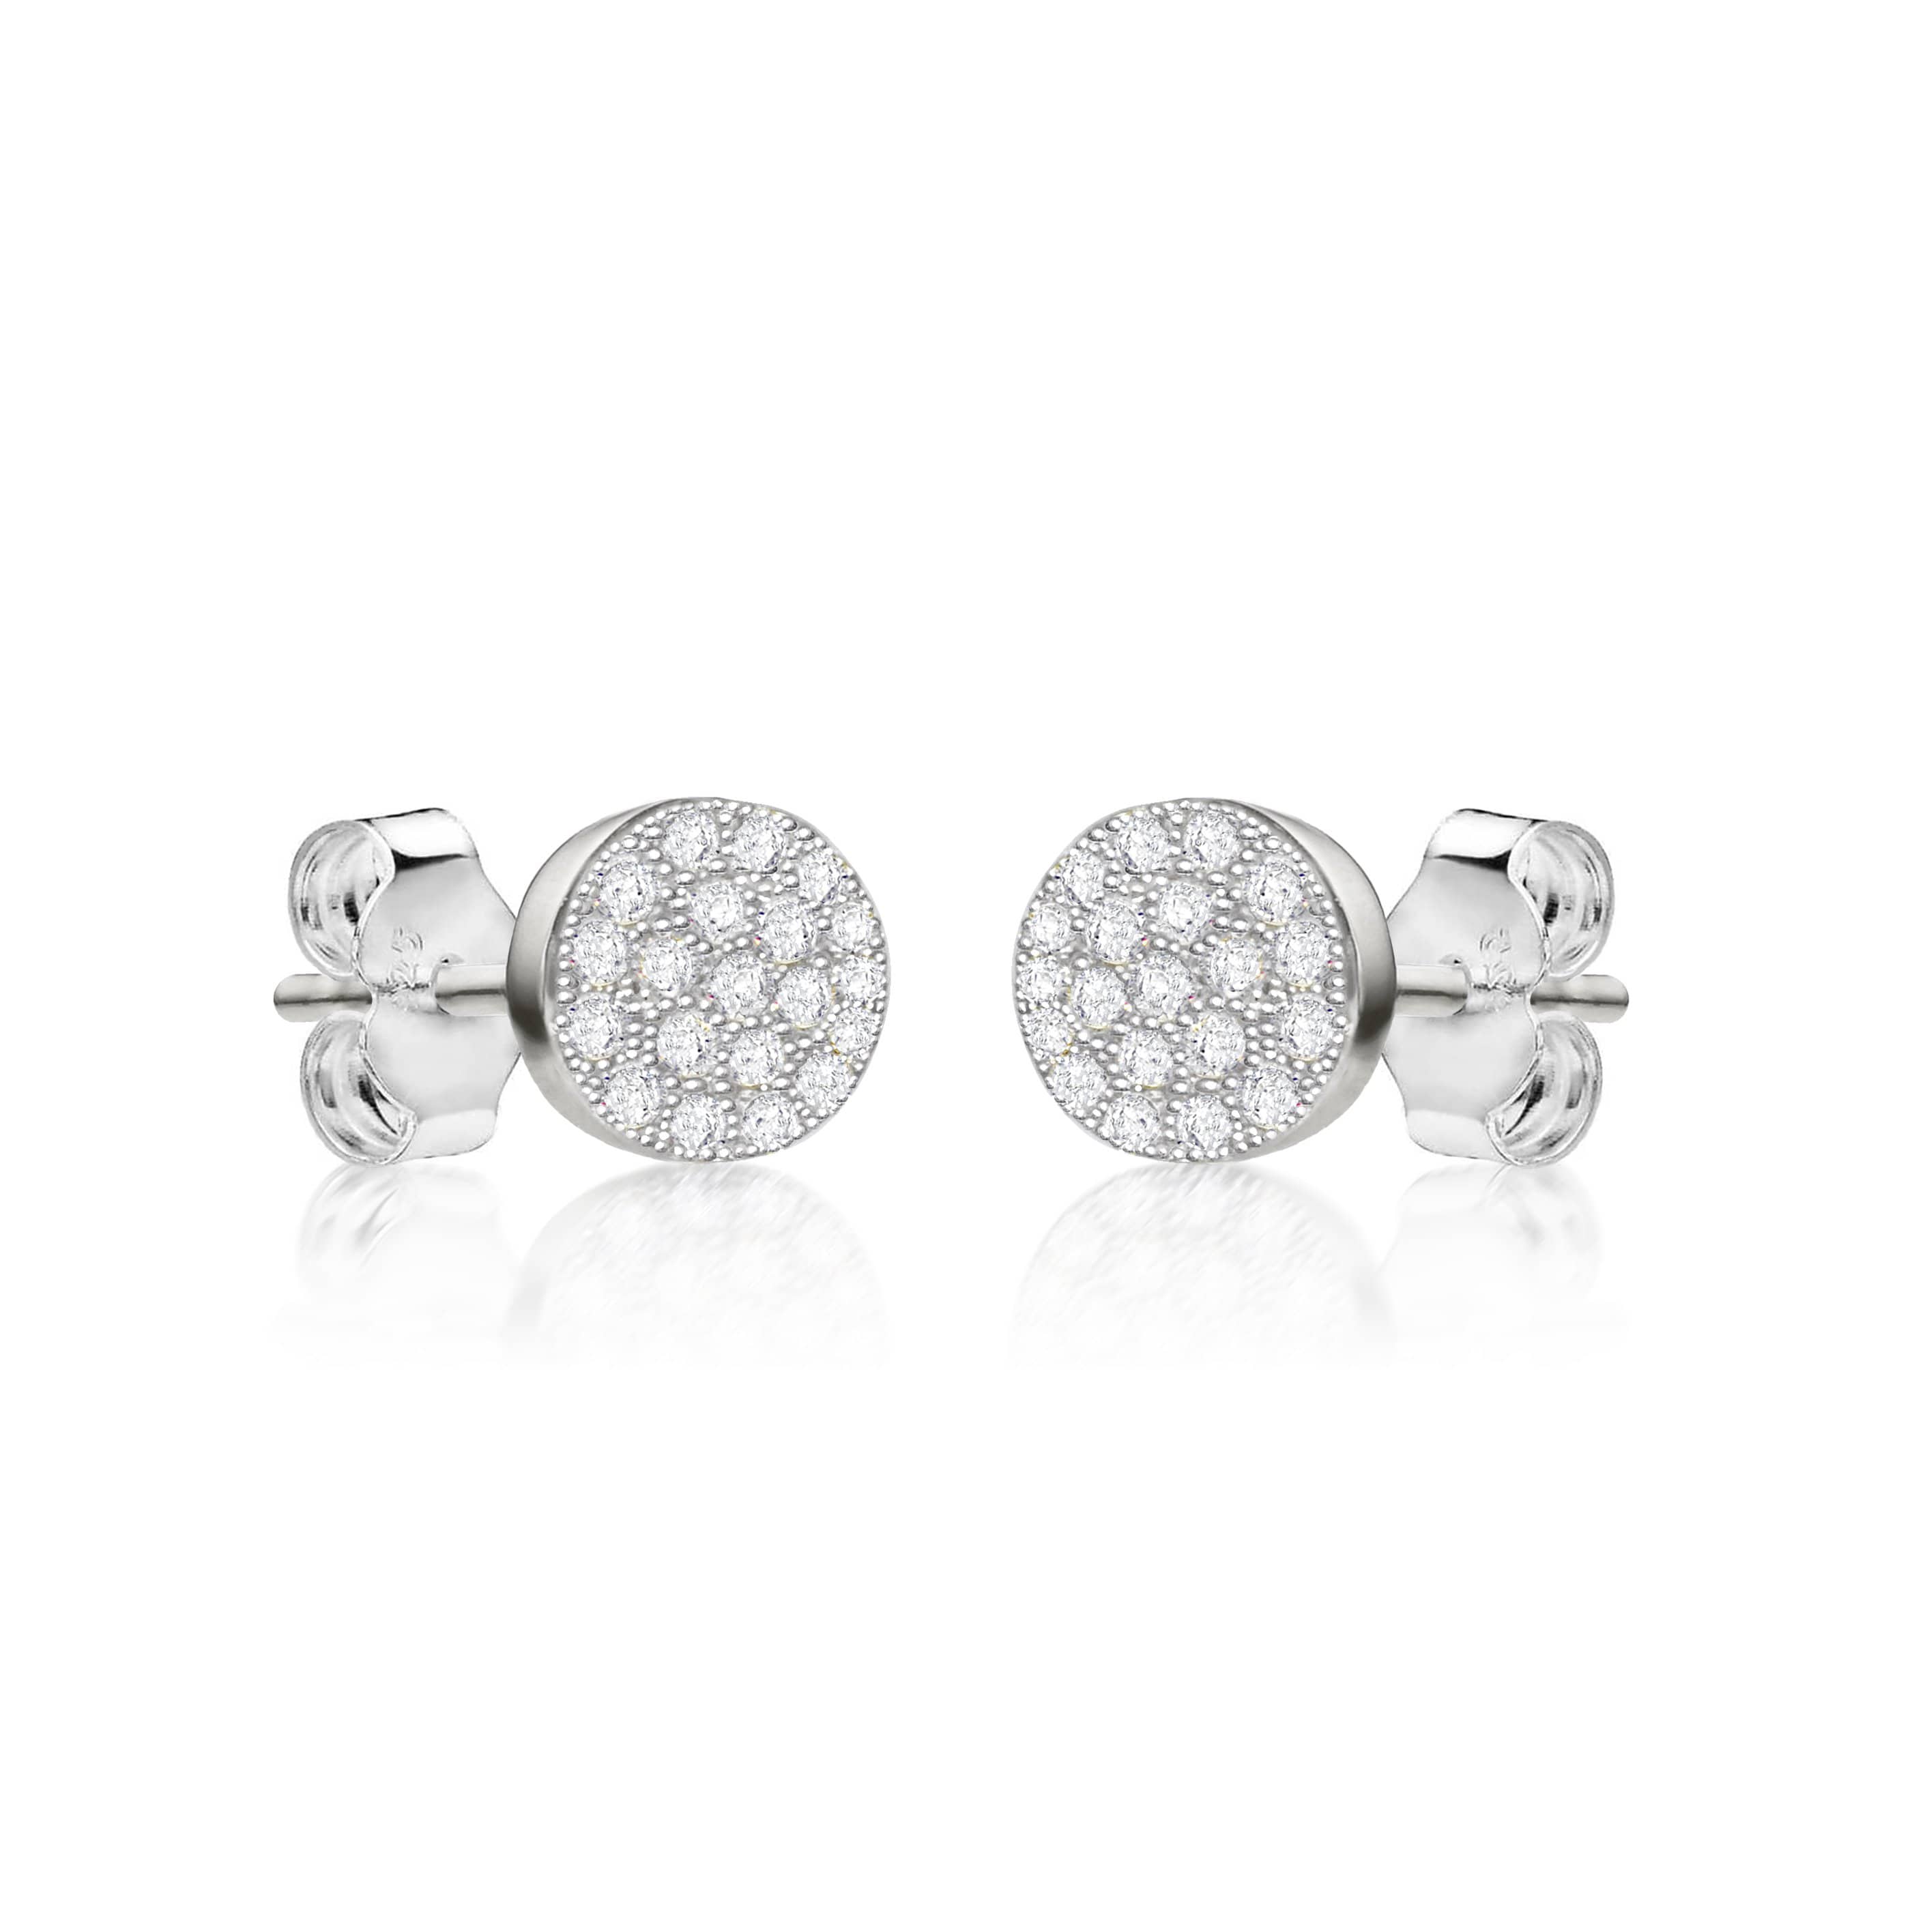 Lynora Jewellery Earring Sterling Silver Pavé Round Studs Sterling Silver